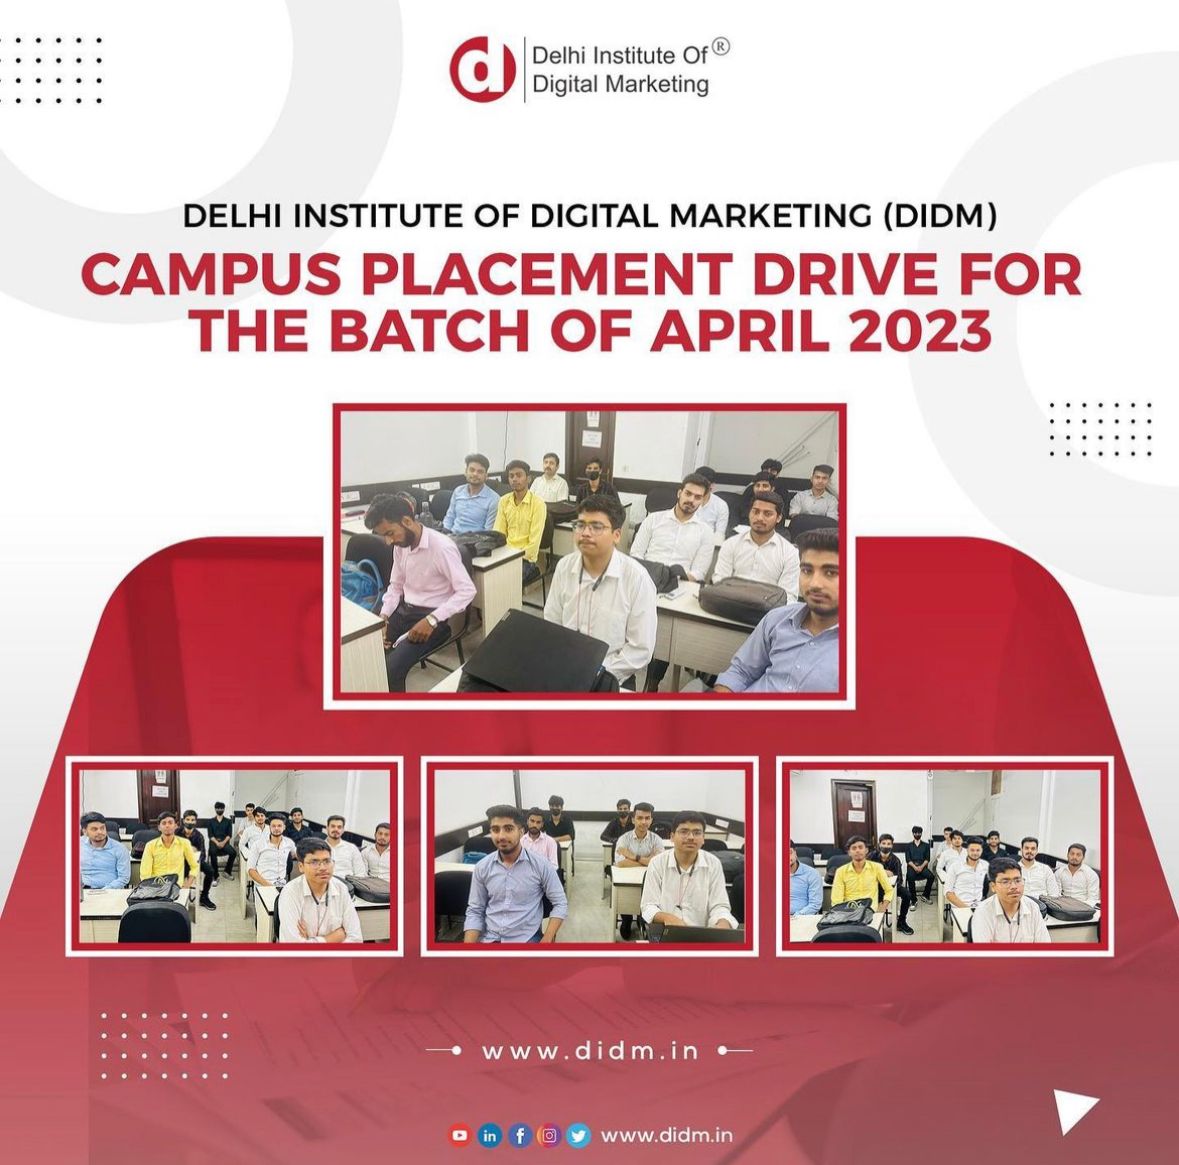 DIDM Conducts an Offline Campus Placement Drive April 2023